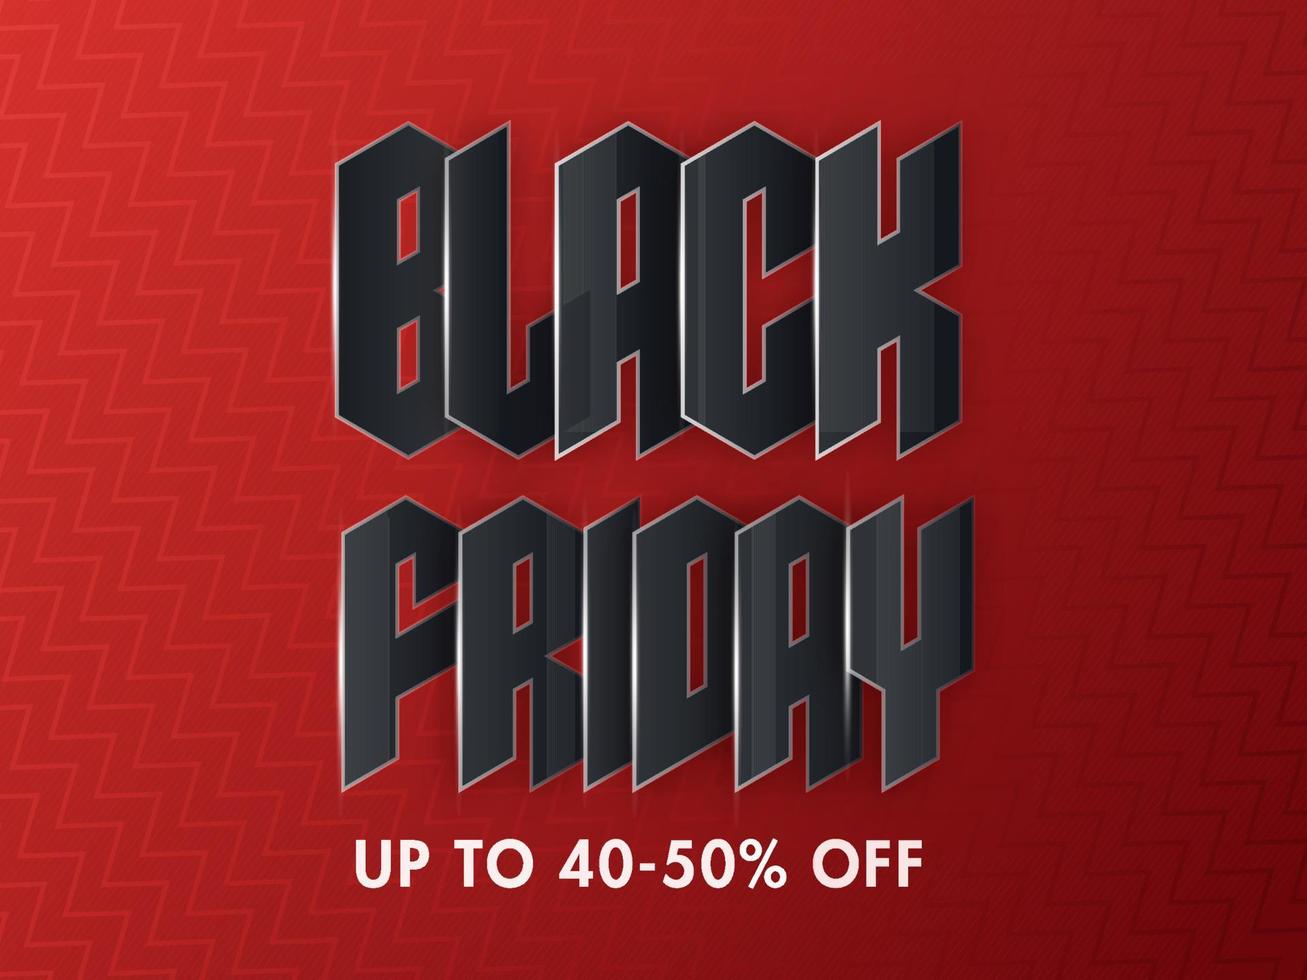 Paper Cut Black Friday Text with 40-50 Discount Offer on Red Zig Zag Pattern Background for Sale. vector